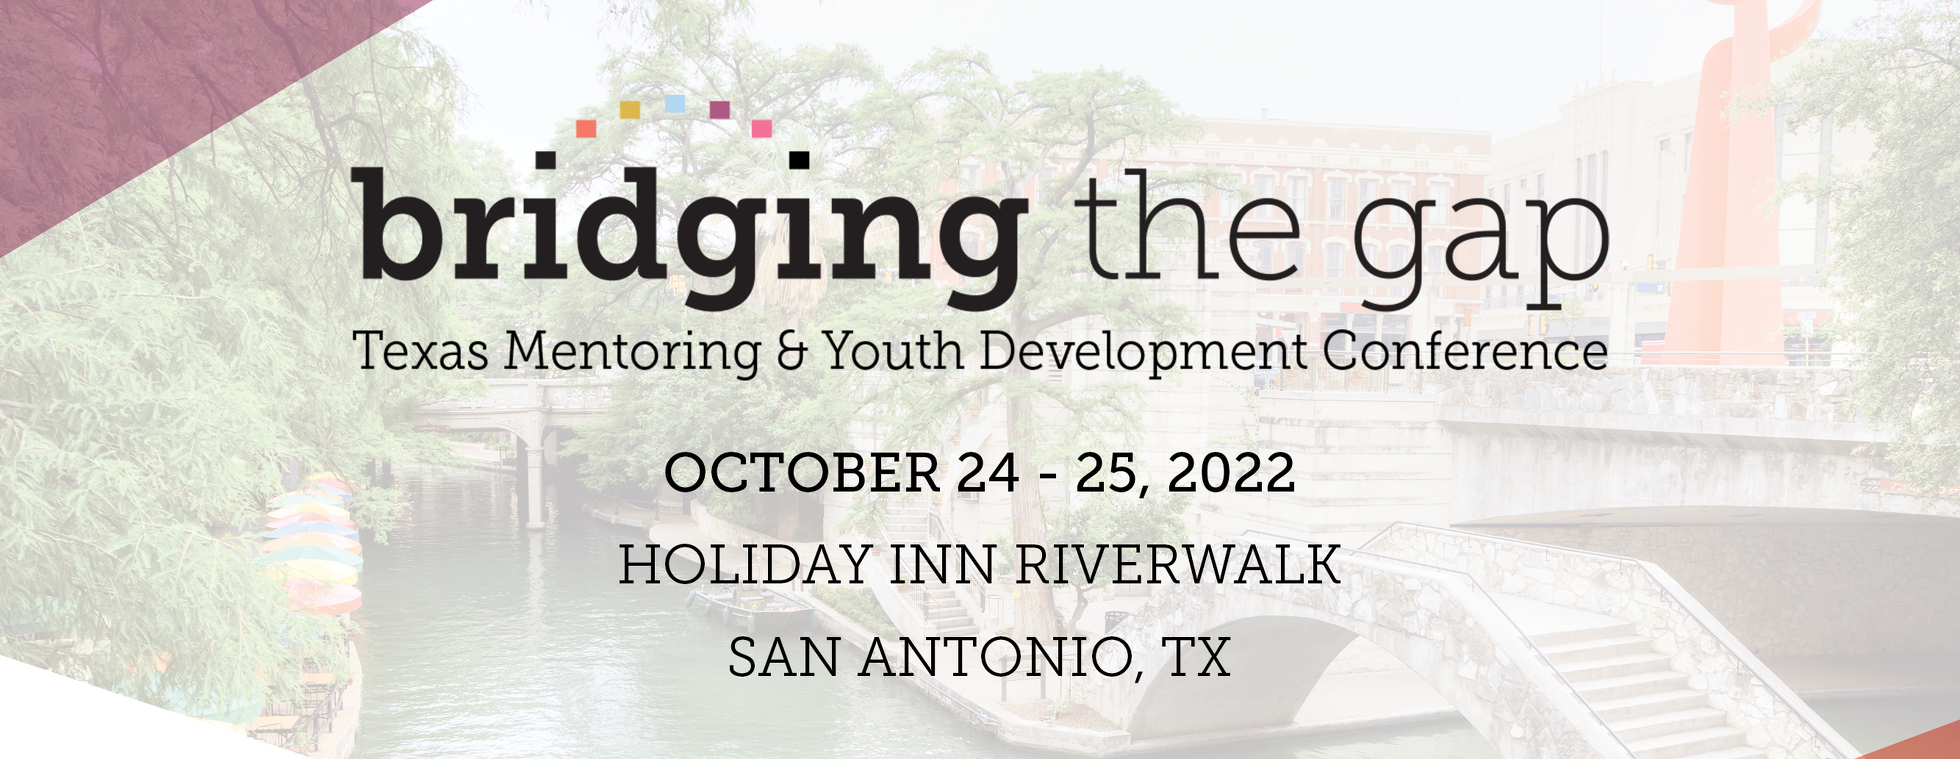 Texas Mentoring Conference 2022